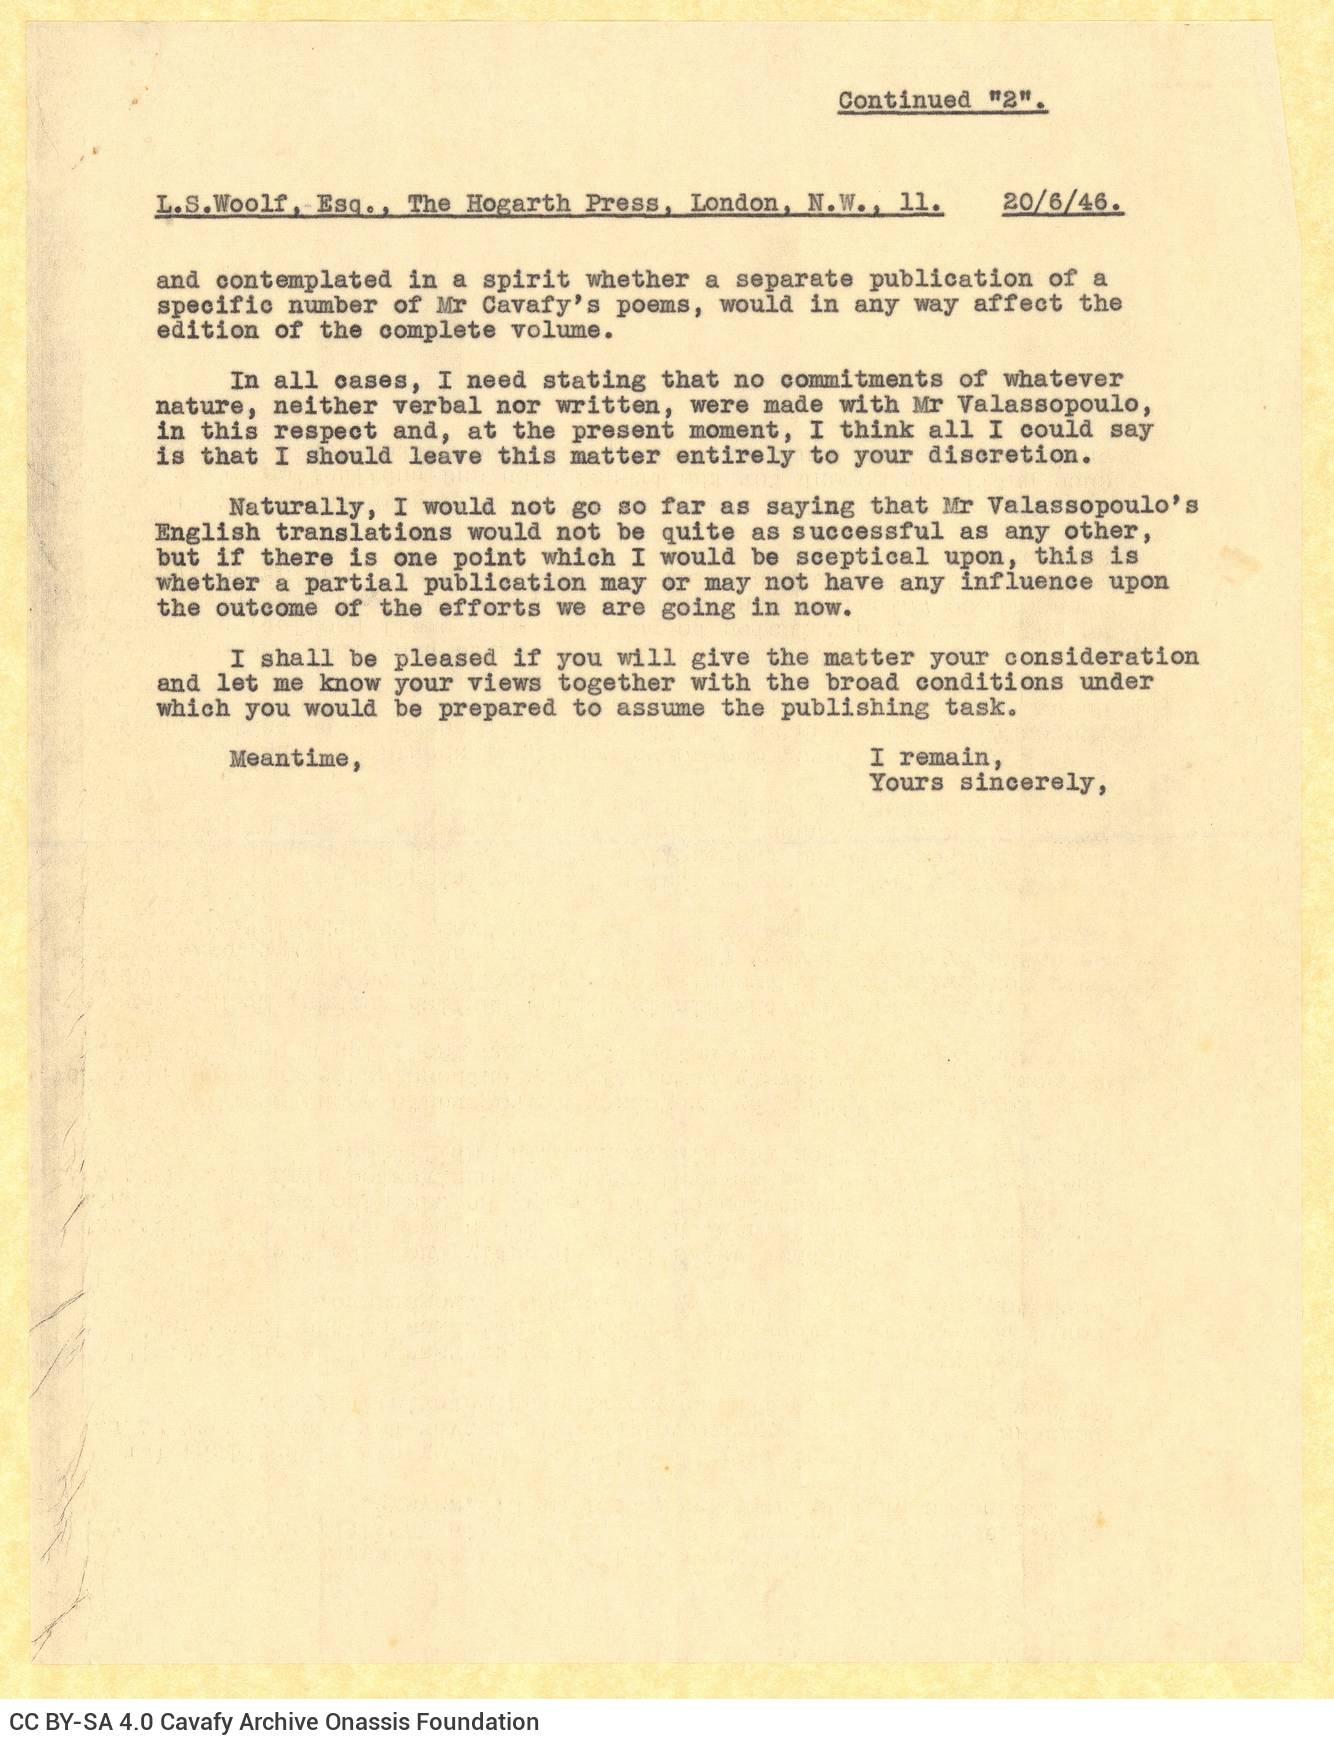 Two typewritten copies of a letter by Alekos Singopoulo to Leonard Woolf on the recto of two sheets. One of the copies bears 